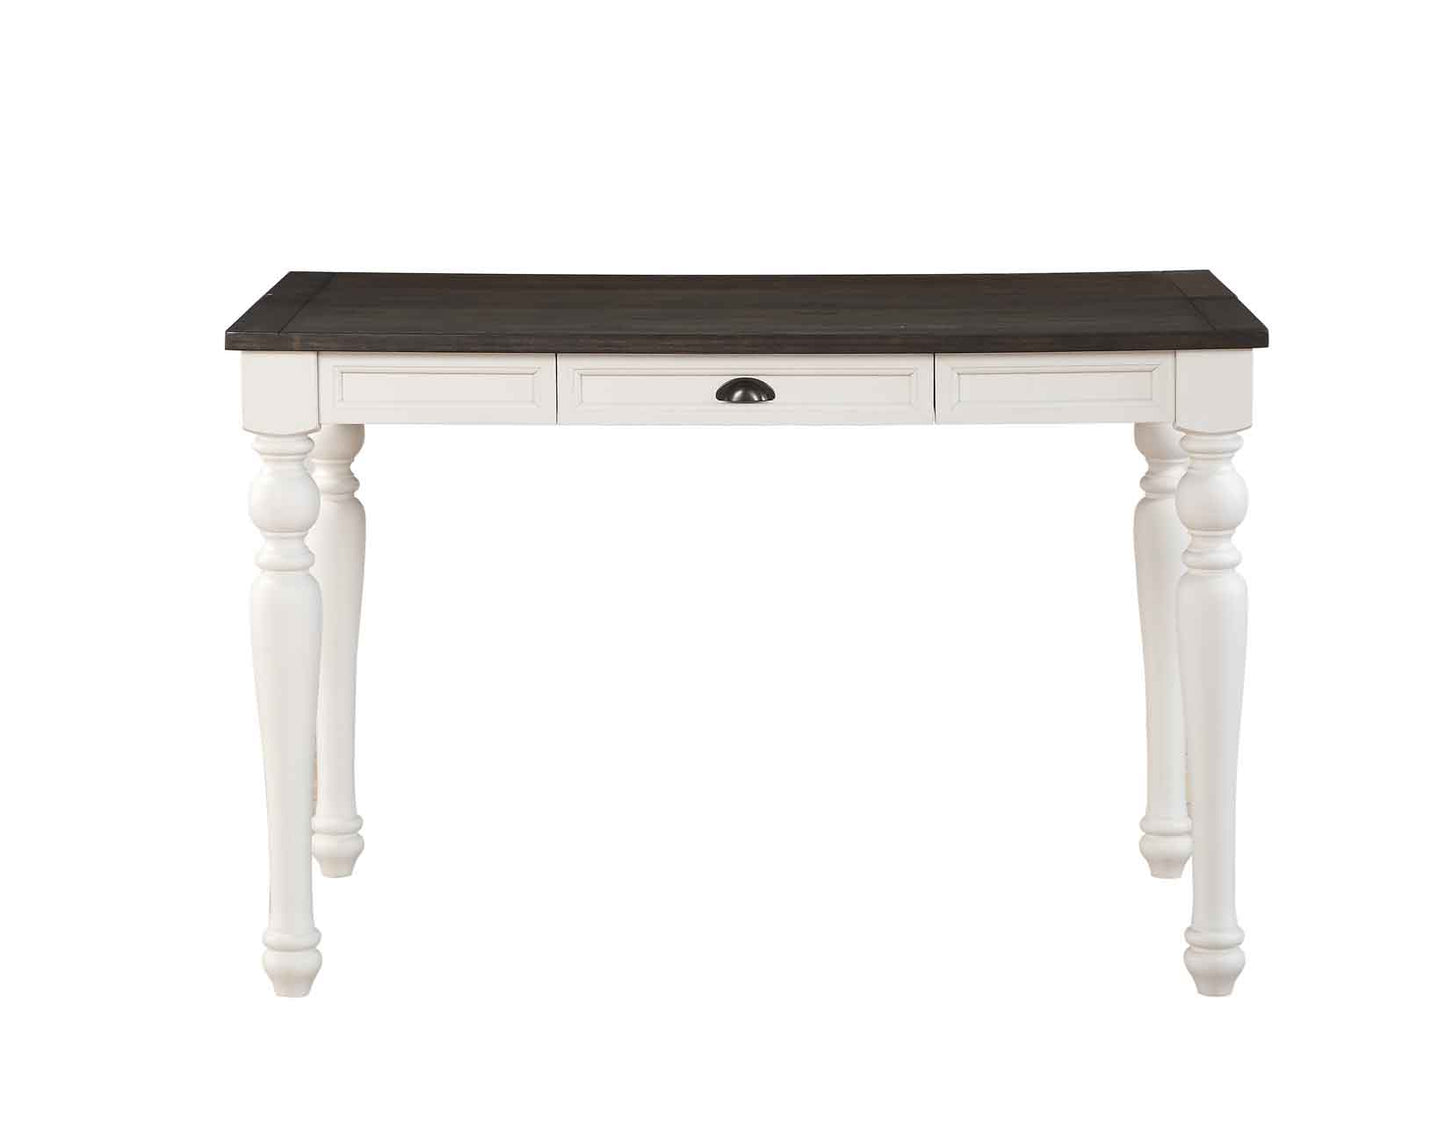 Joanna Two-Tone Counter Height Table by Steve Silver